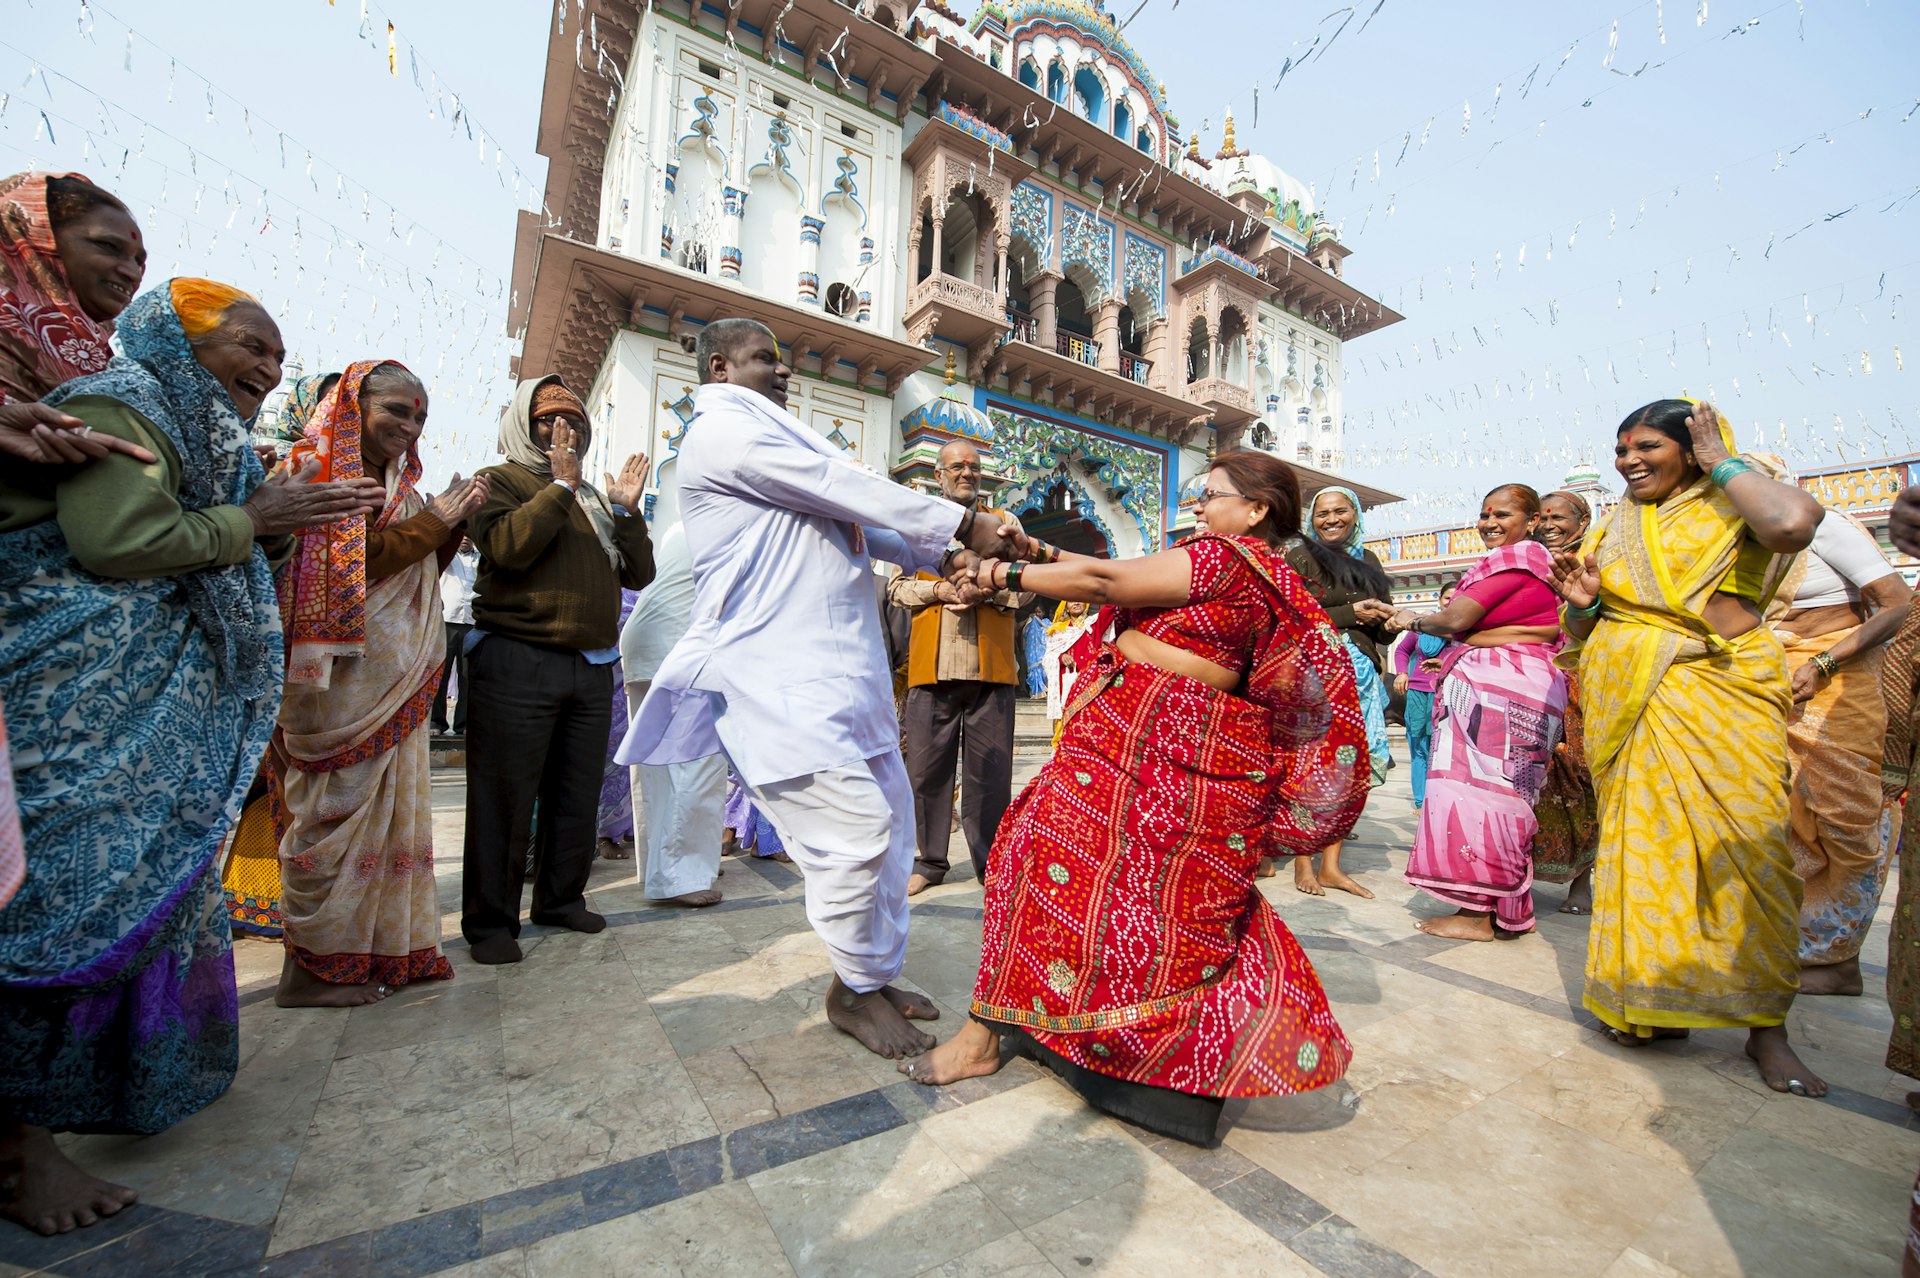 Hindu pilgrims laugh and smile as a couple dances in a circle of onlookers